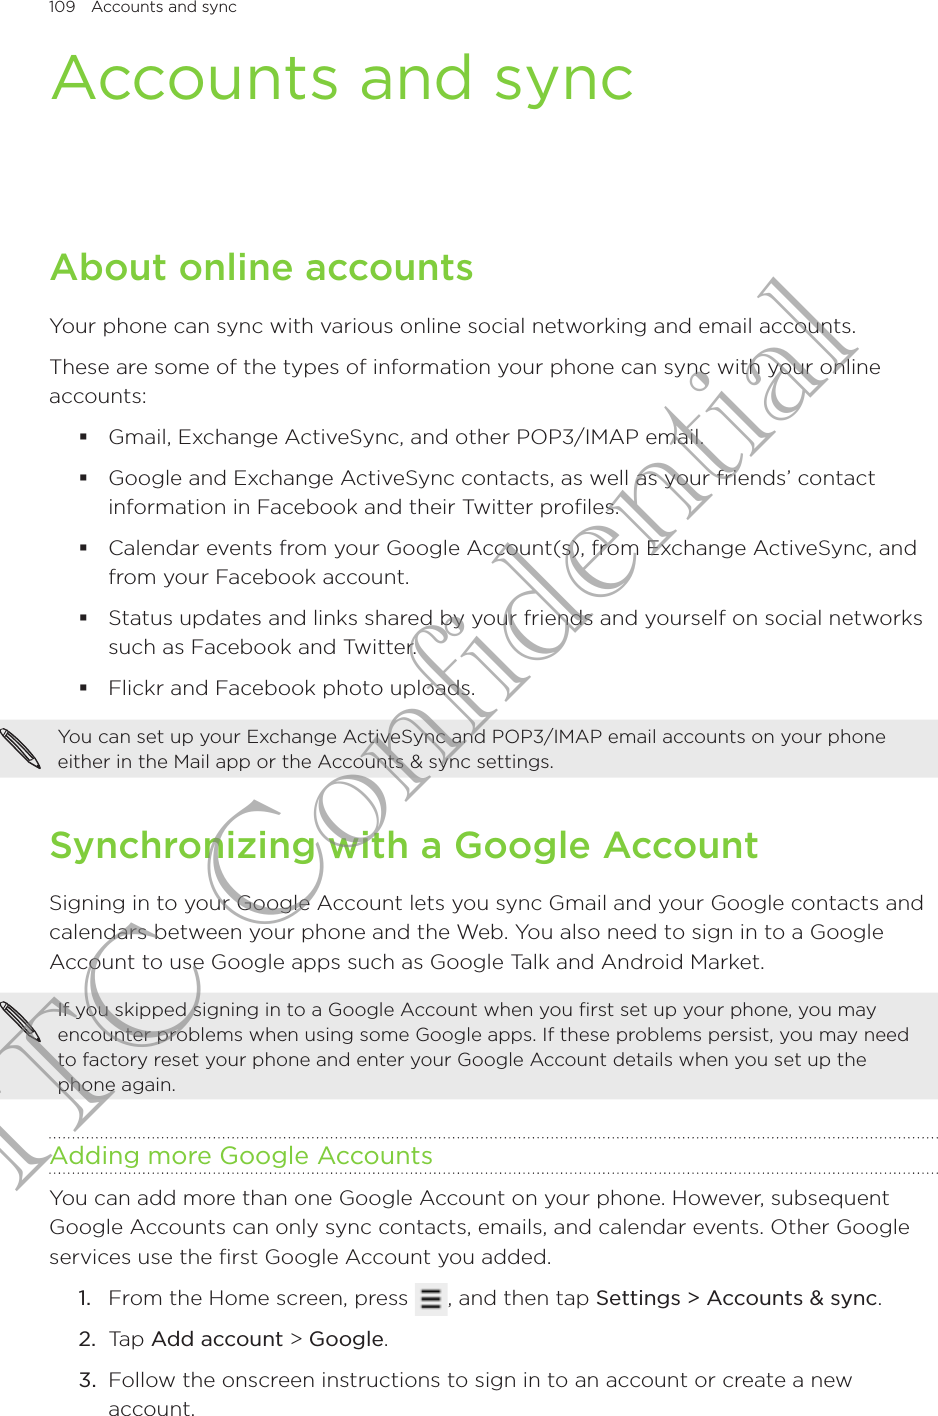 109  Accounts and sync      Accounts and syncAbout online accountsYour phone can sync with various online social networking and email accounts.These are some of the types of information your phone can sync with your online accounts:Gmail, Exchange ActiveSync, and other POP3/IMAP email.Google and Exchange ActiveSync contacts, as well as your friends’ contact information in Facebook and their Twitter profiles.Calendar events from your Google Account(s), from Exchange ActiveSync, and from your Facebook account.Status updates and links shared by your friends and yourself on social networks such as Facebook and Twitter.Flickr and Facebook photo uploads.You can set up your Exchange ActiveSync and POP3/IMAP email accounts on your phone either in the Mail app or the Accounts &amp; sync settings.Synchronizing with a Google AccountSigning in to your Google Account lets you sync Gmail and your Google contacts and calendars between your phone and the Web. You also need to sign in to a Google Account to use Google apps such as Google Talk and Android Market.If you skipped signing in to a Google Account when you first set up your phone, you may encounter problems when using some Google apps. If these problems persist, you may need to factory reset your phone and enter your Google Account details when you set up the phone again.Adding more Google AccountsYou can add more than one Google Account on your phone. However, subsequent Google Accounts can only sync contacts, emails, and calendar events. Other Google services use the first Google Account you added.From the Home screen, press  , and then tap Settings &gt; Accounts &amp; sync. Tap Add account &gt; Google.Follow the onscreen instructions to sign in to an account or create a new account.1.2.3.HTC Confidential